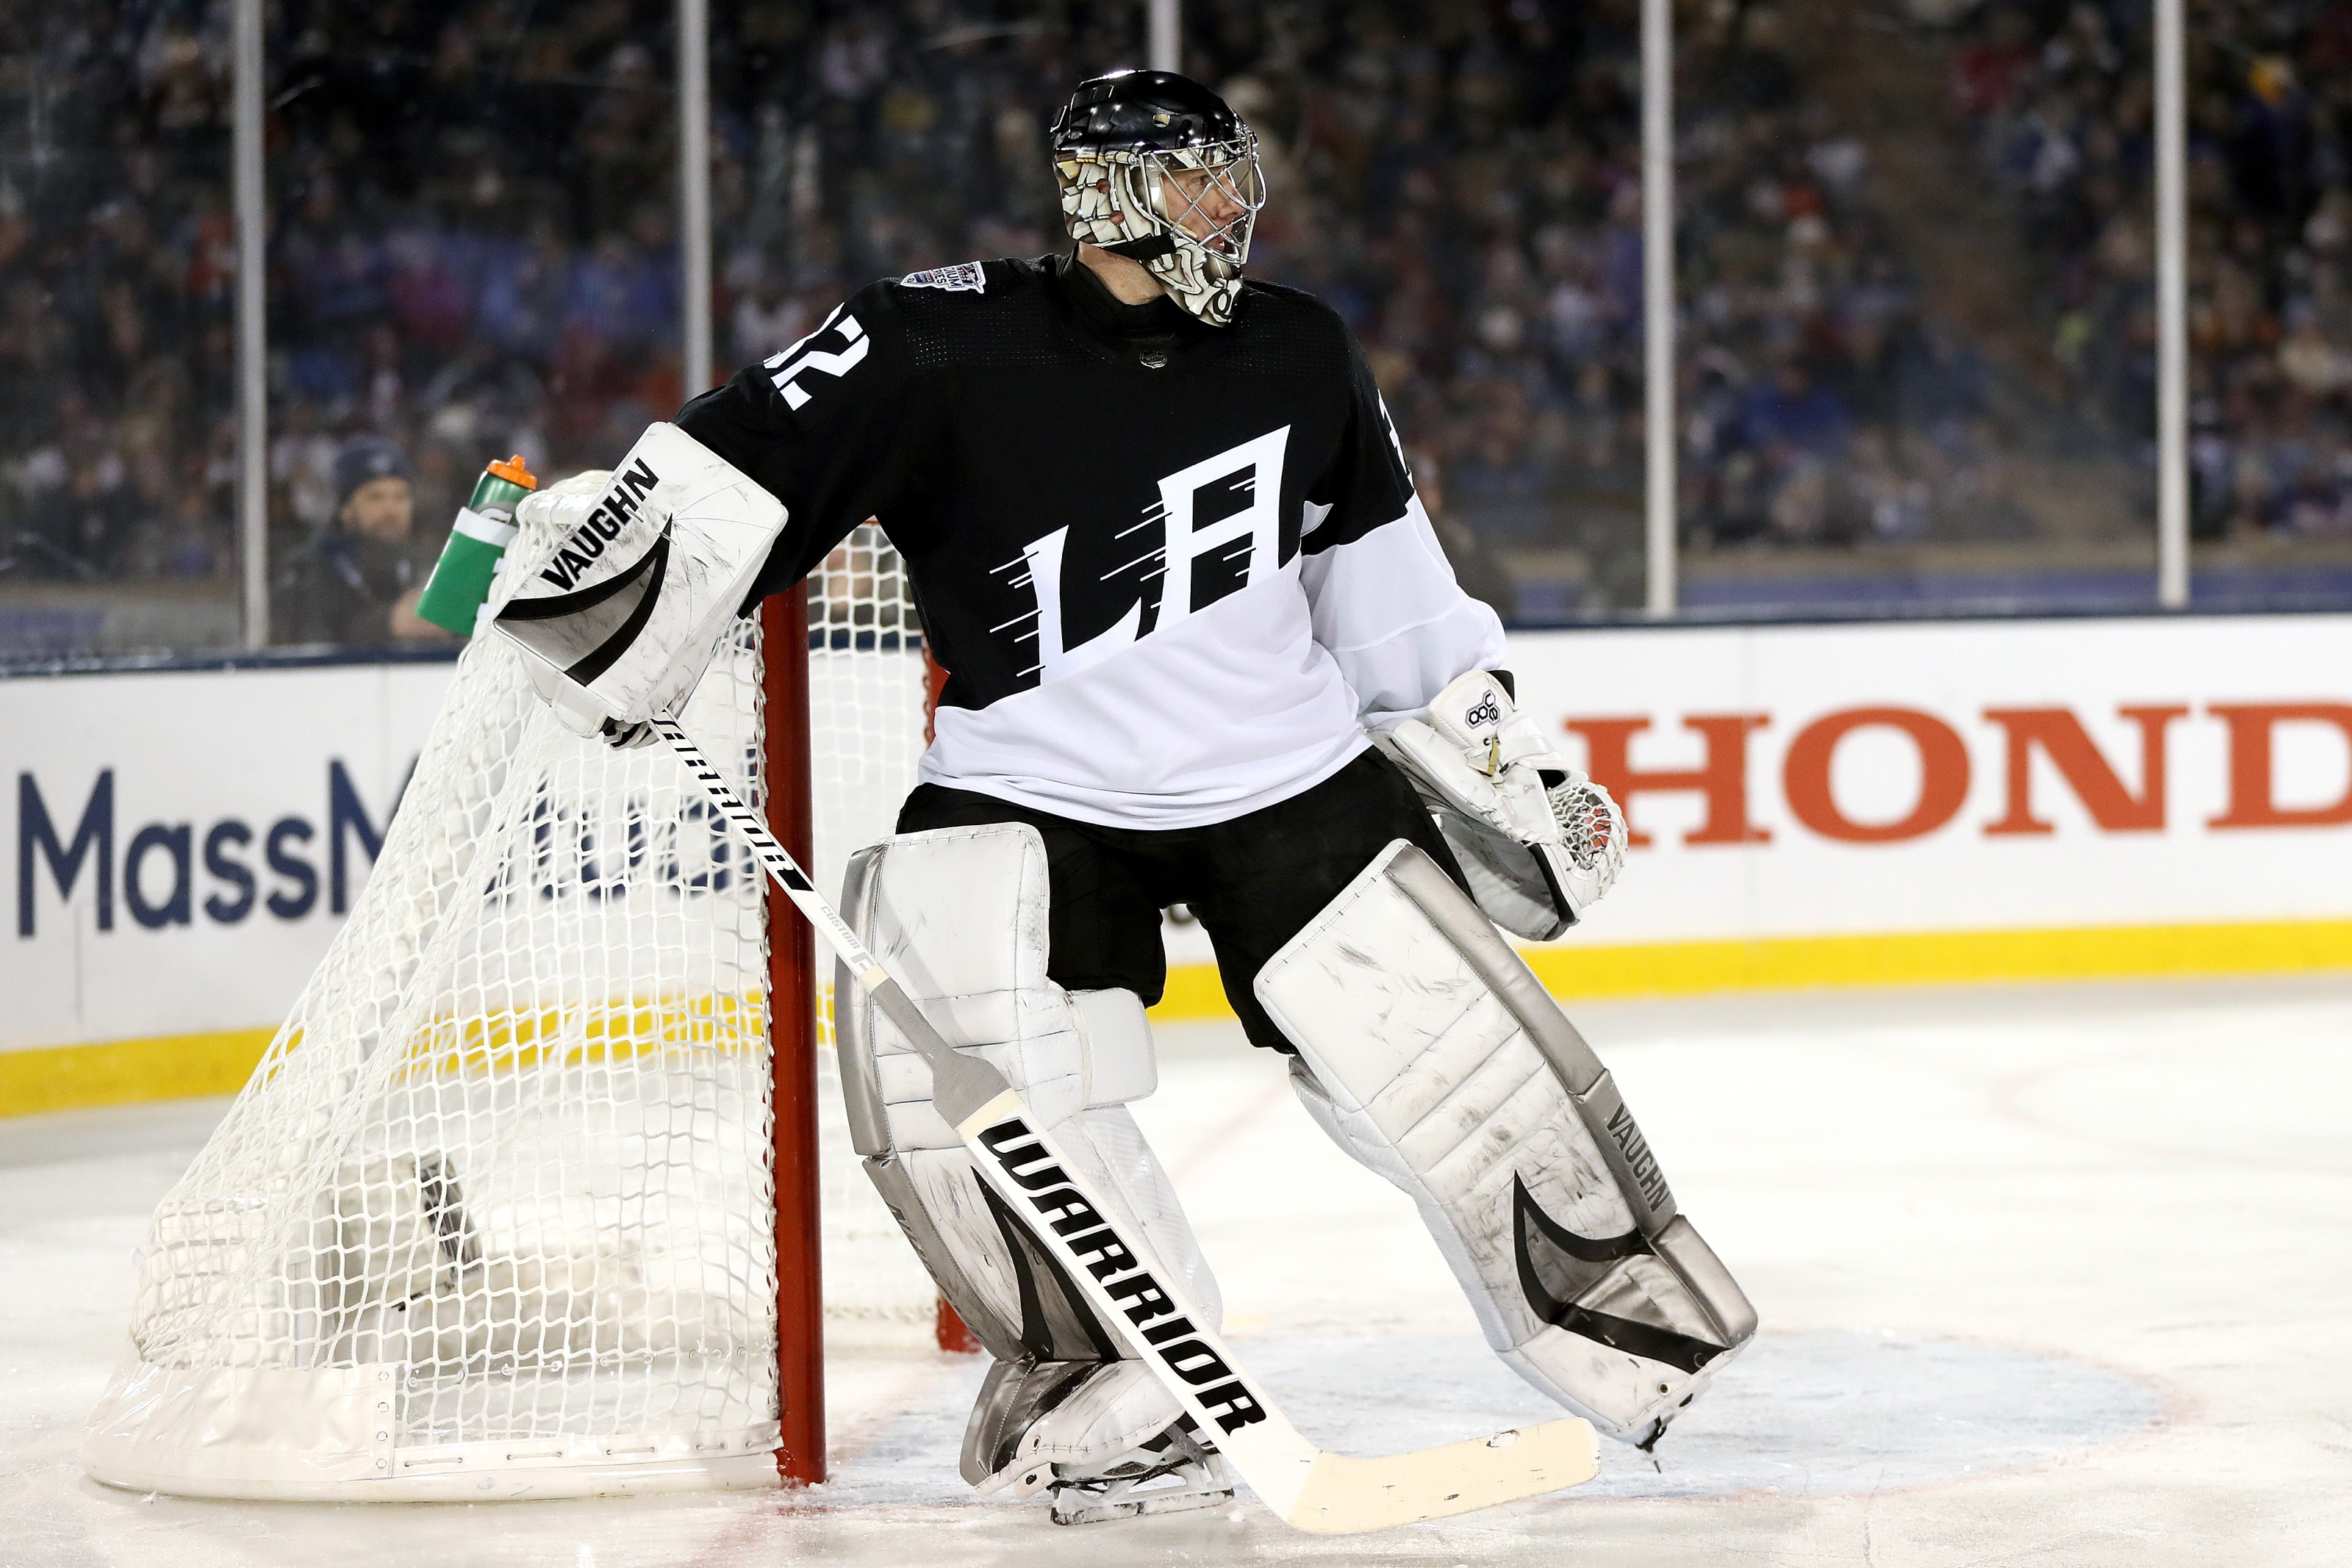 Former LA Kings goalie Jonathan Quick traded to Golden Knights